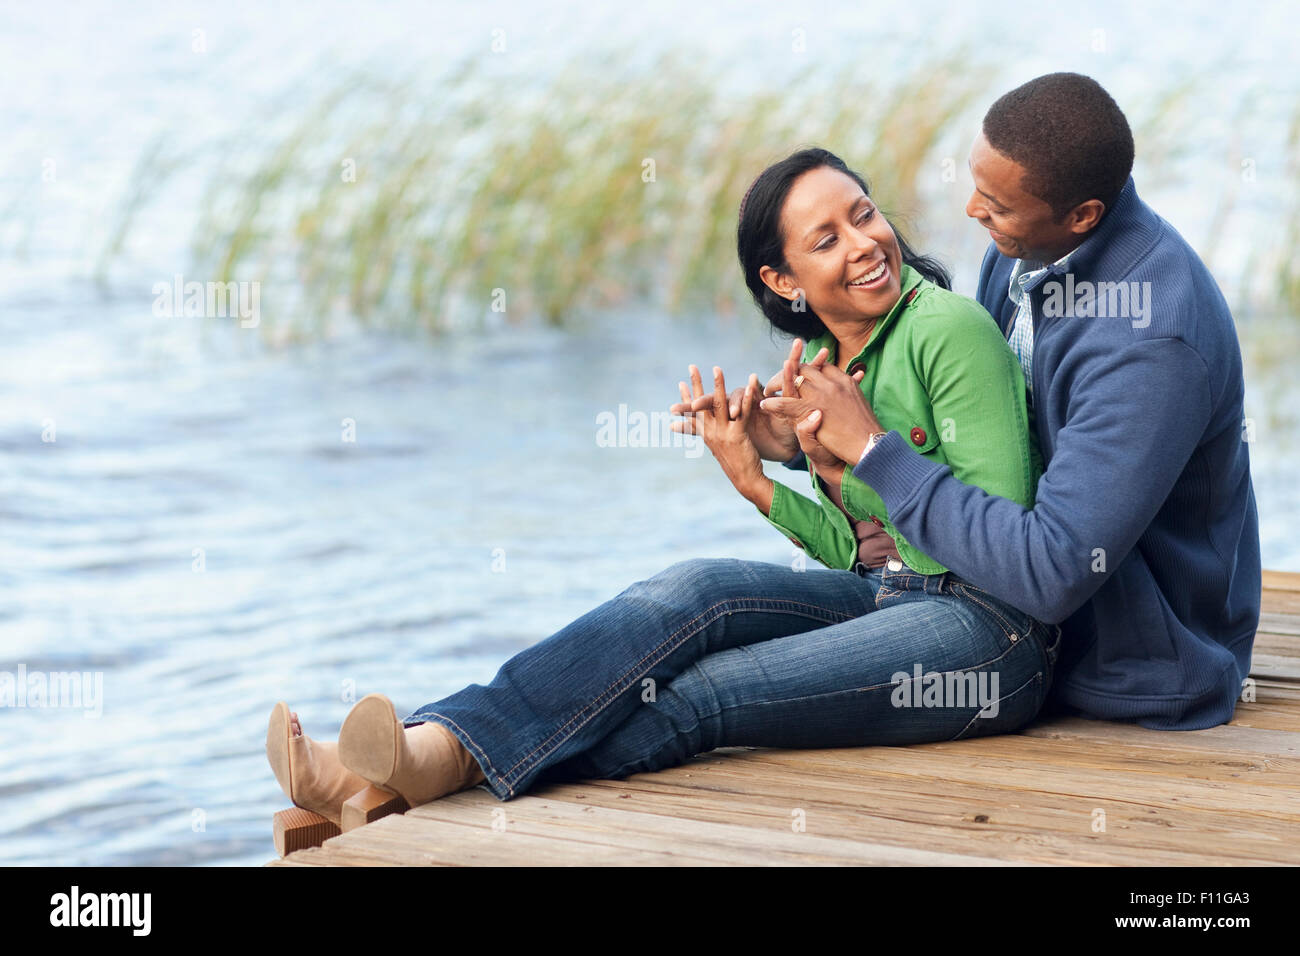 Smiling couple hugging at dock Stock Photo